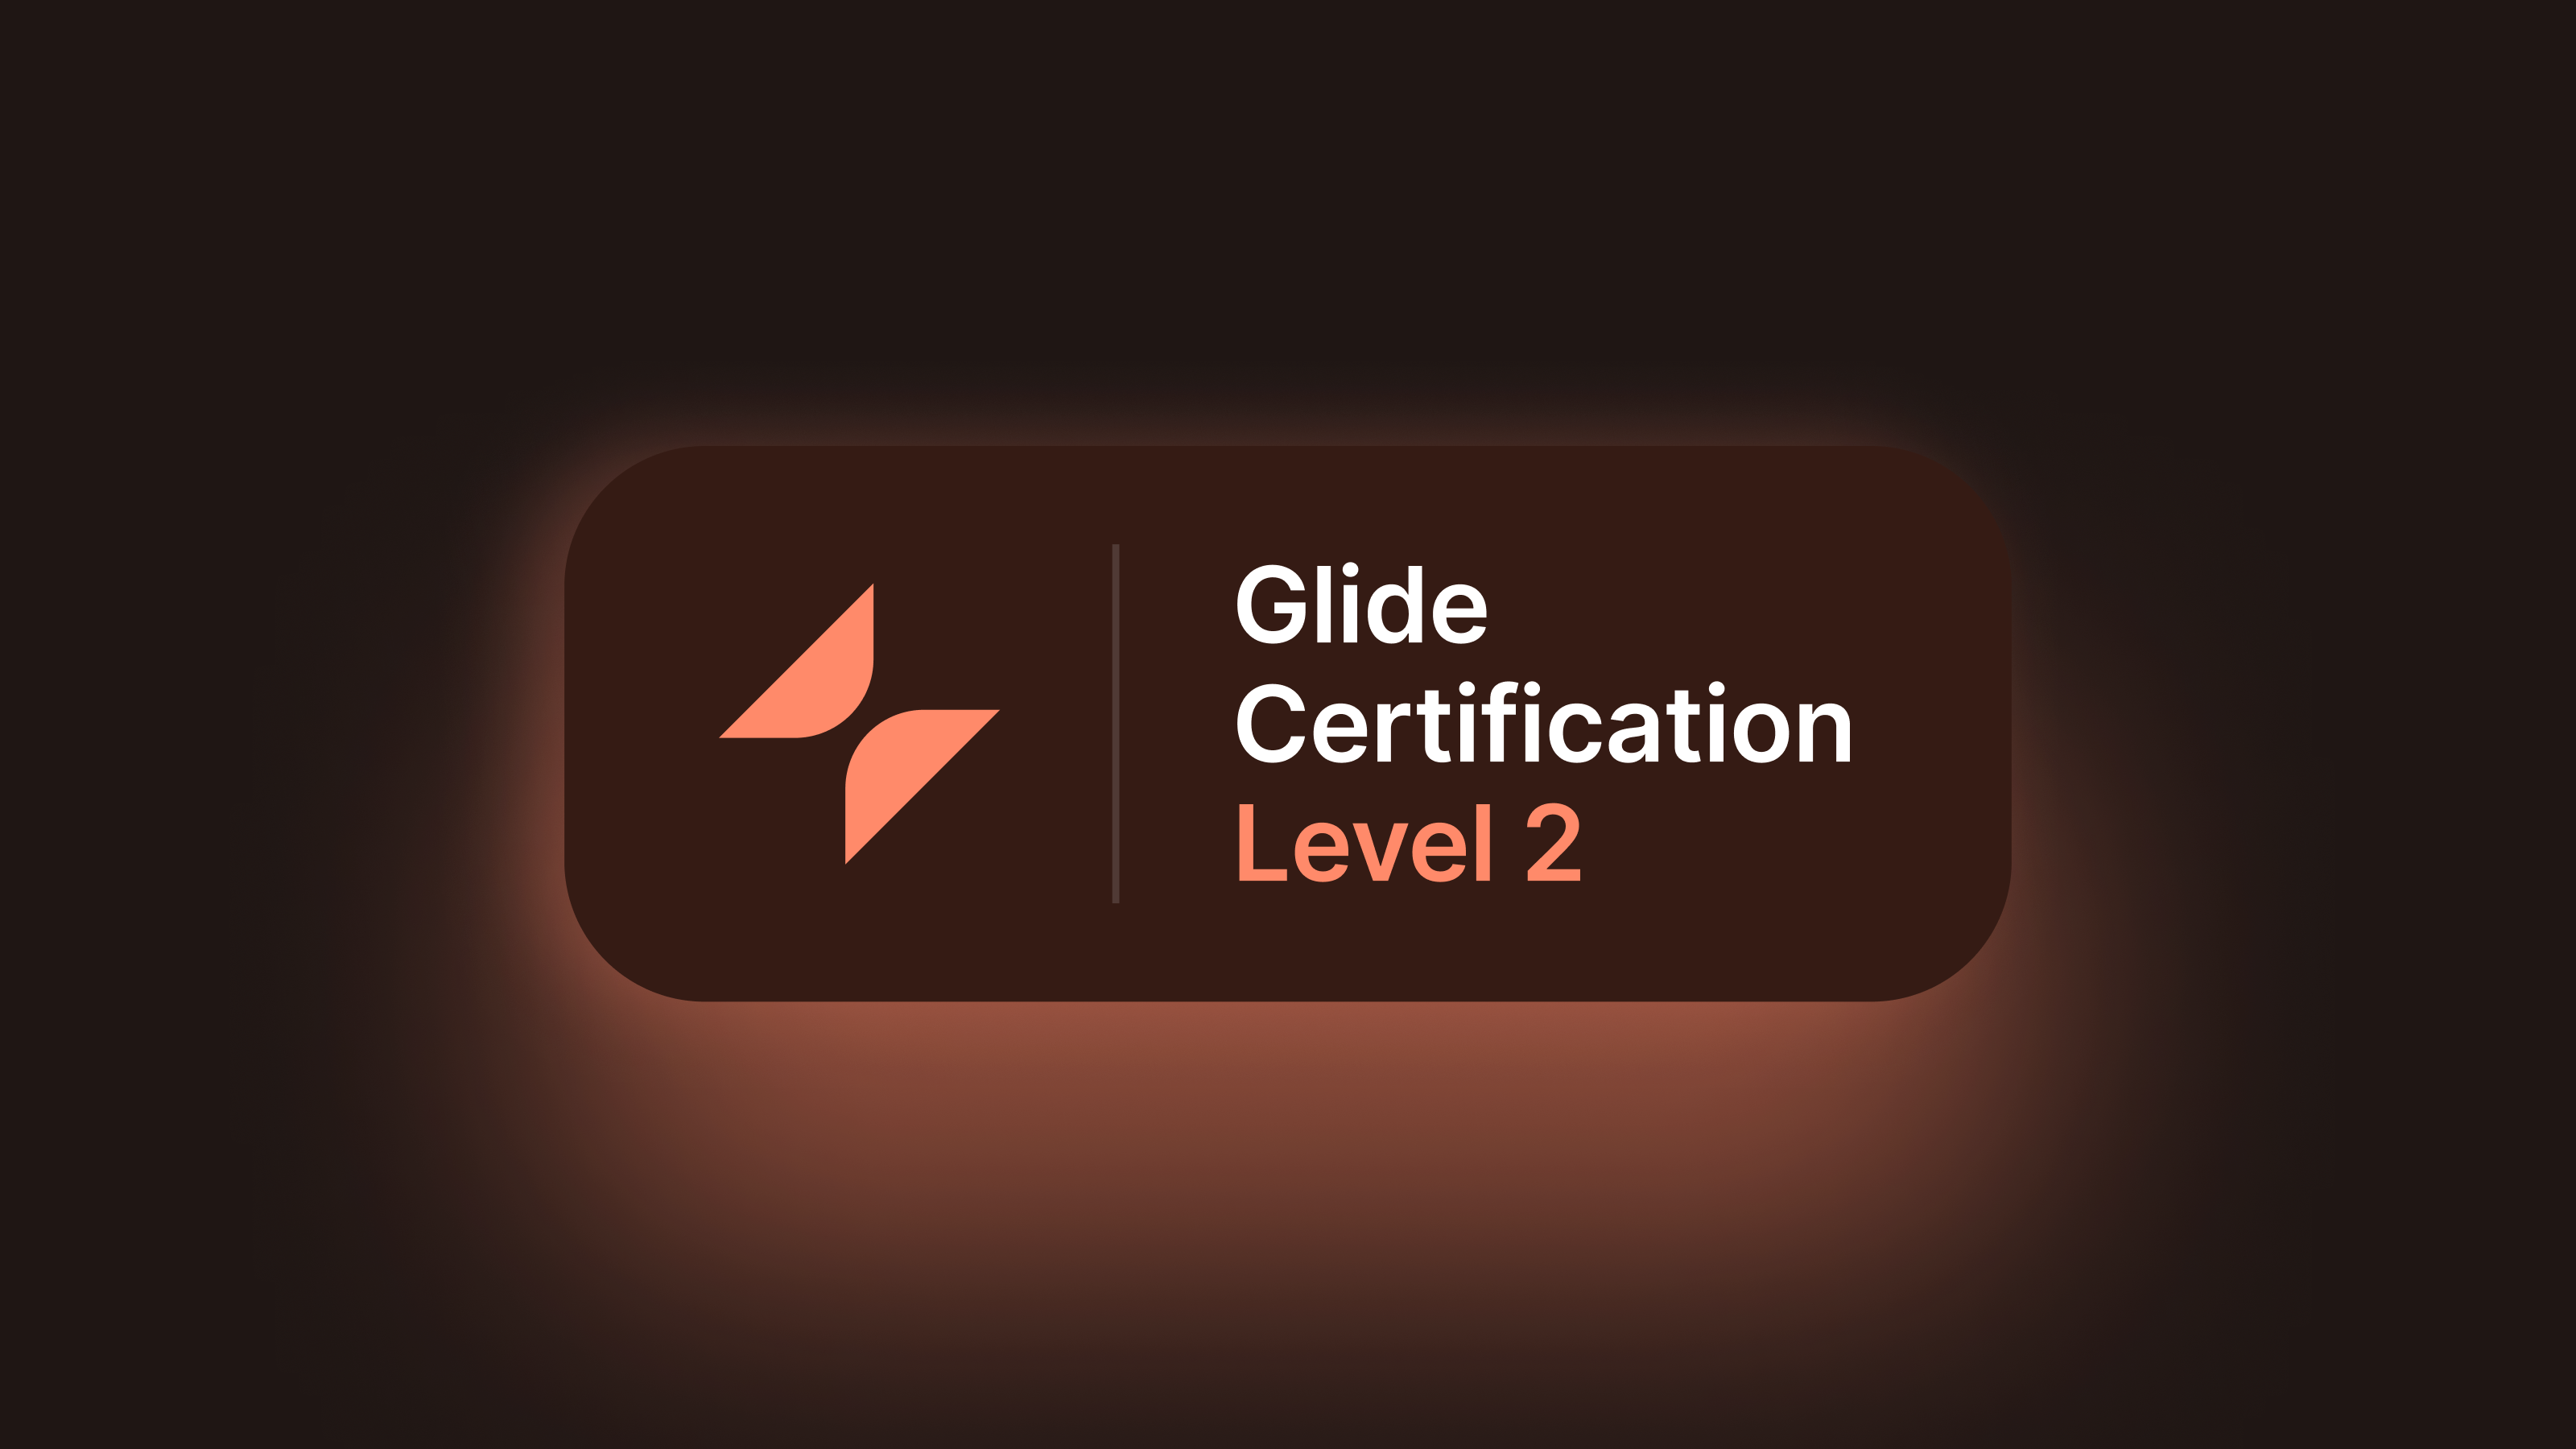 Introducing Glide Certification Level 2